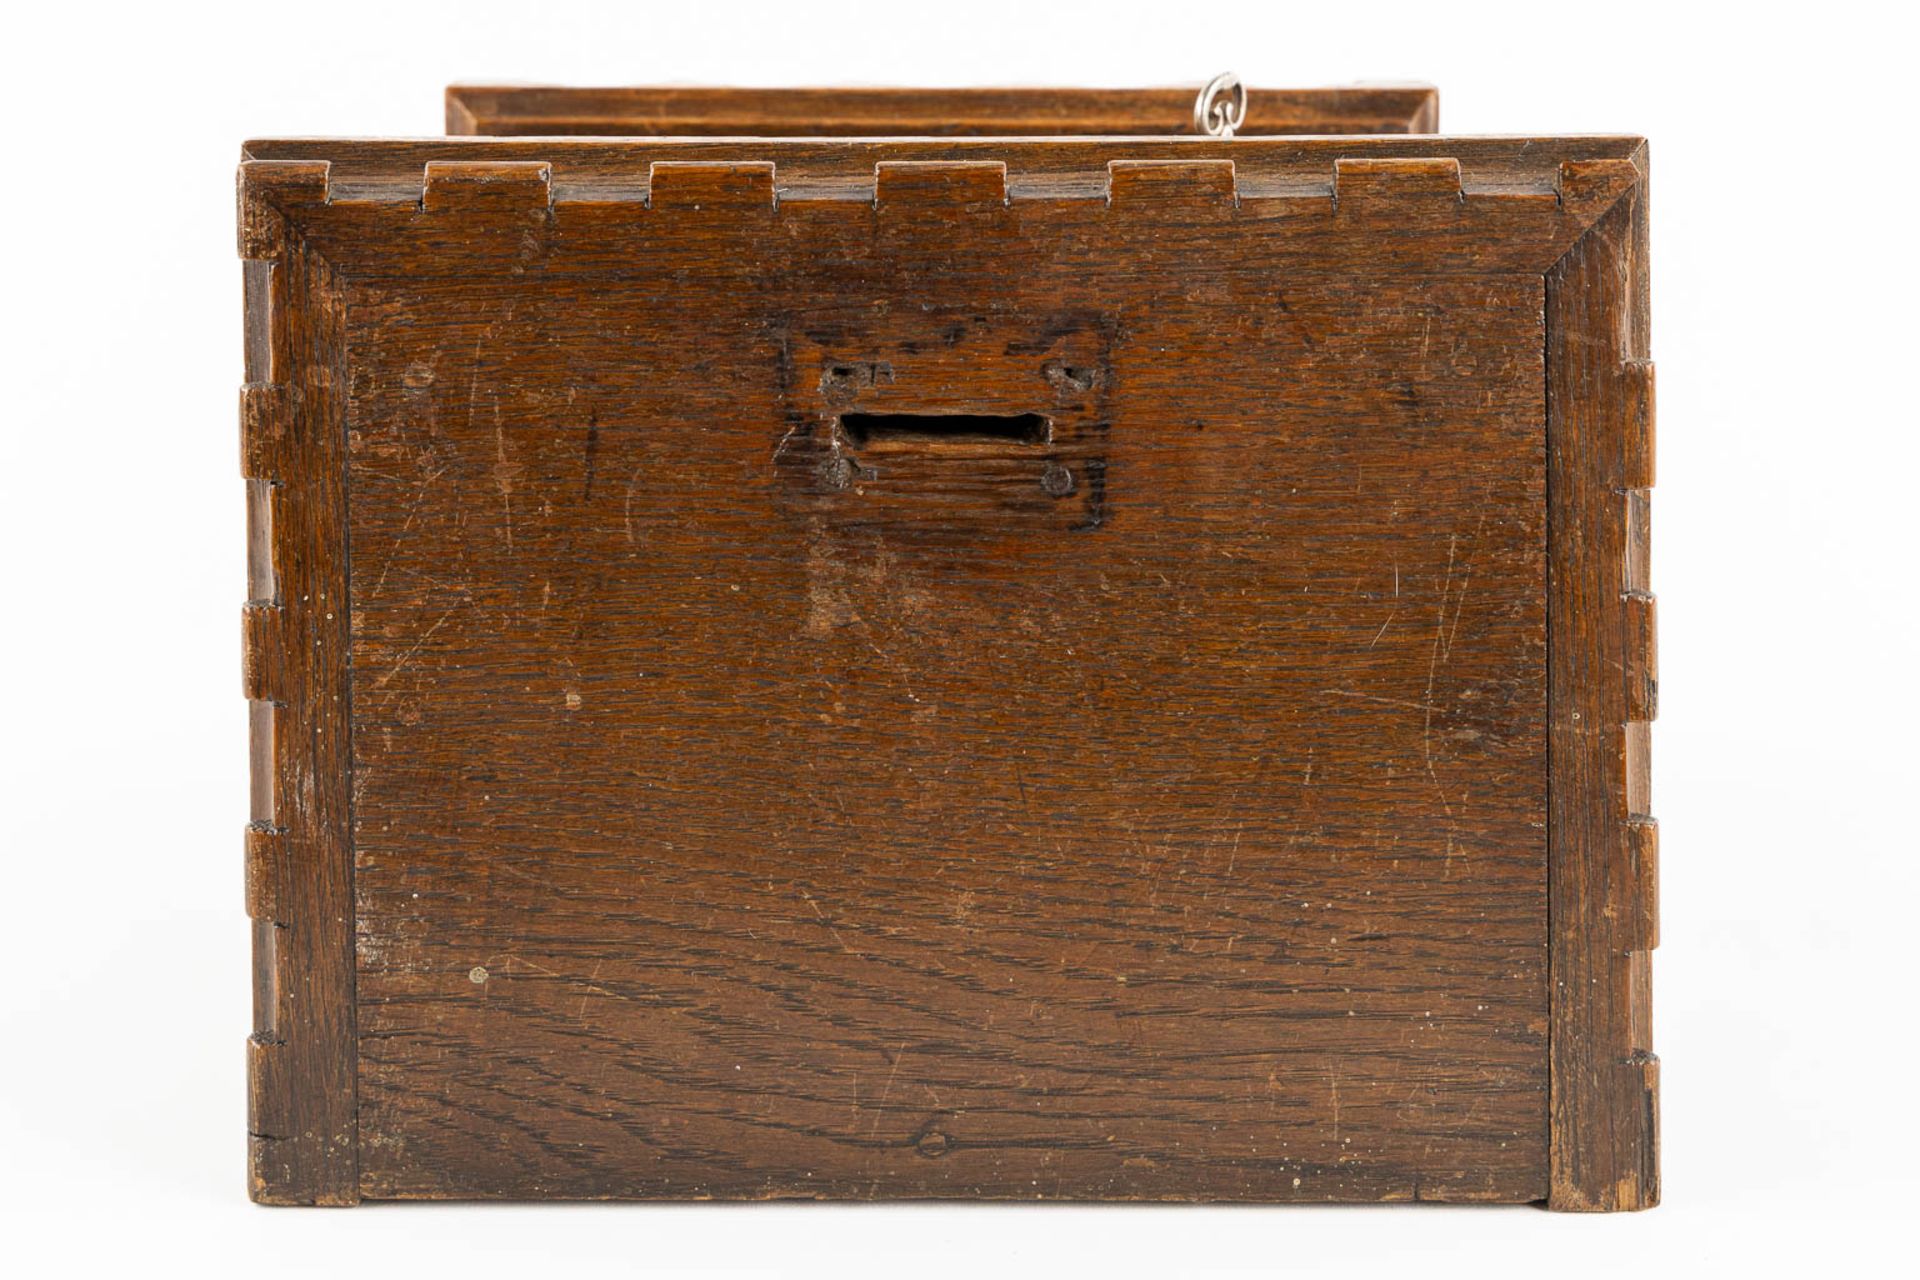 An Offertory or Poor box, sculptured oak, gothic revival. (L:20 x W:27 x H:42 cm) - Image 7 of 11